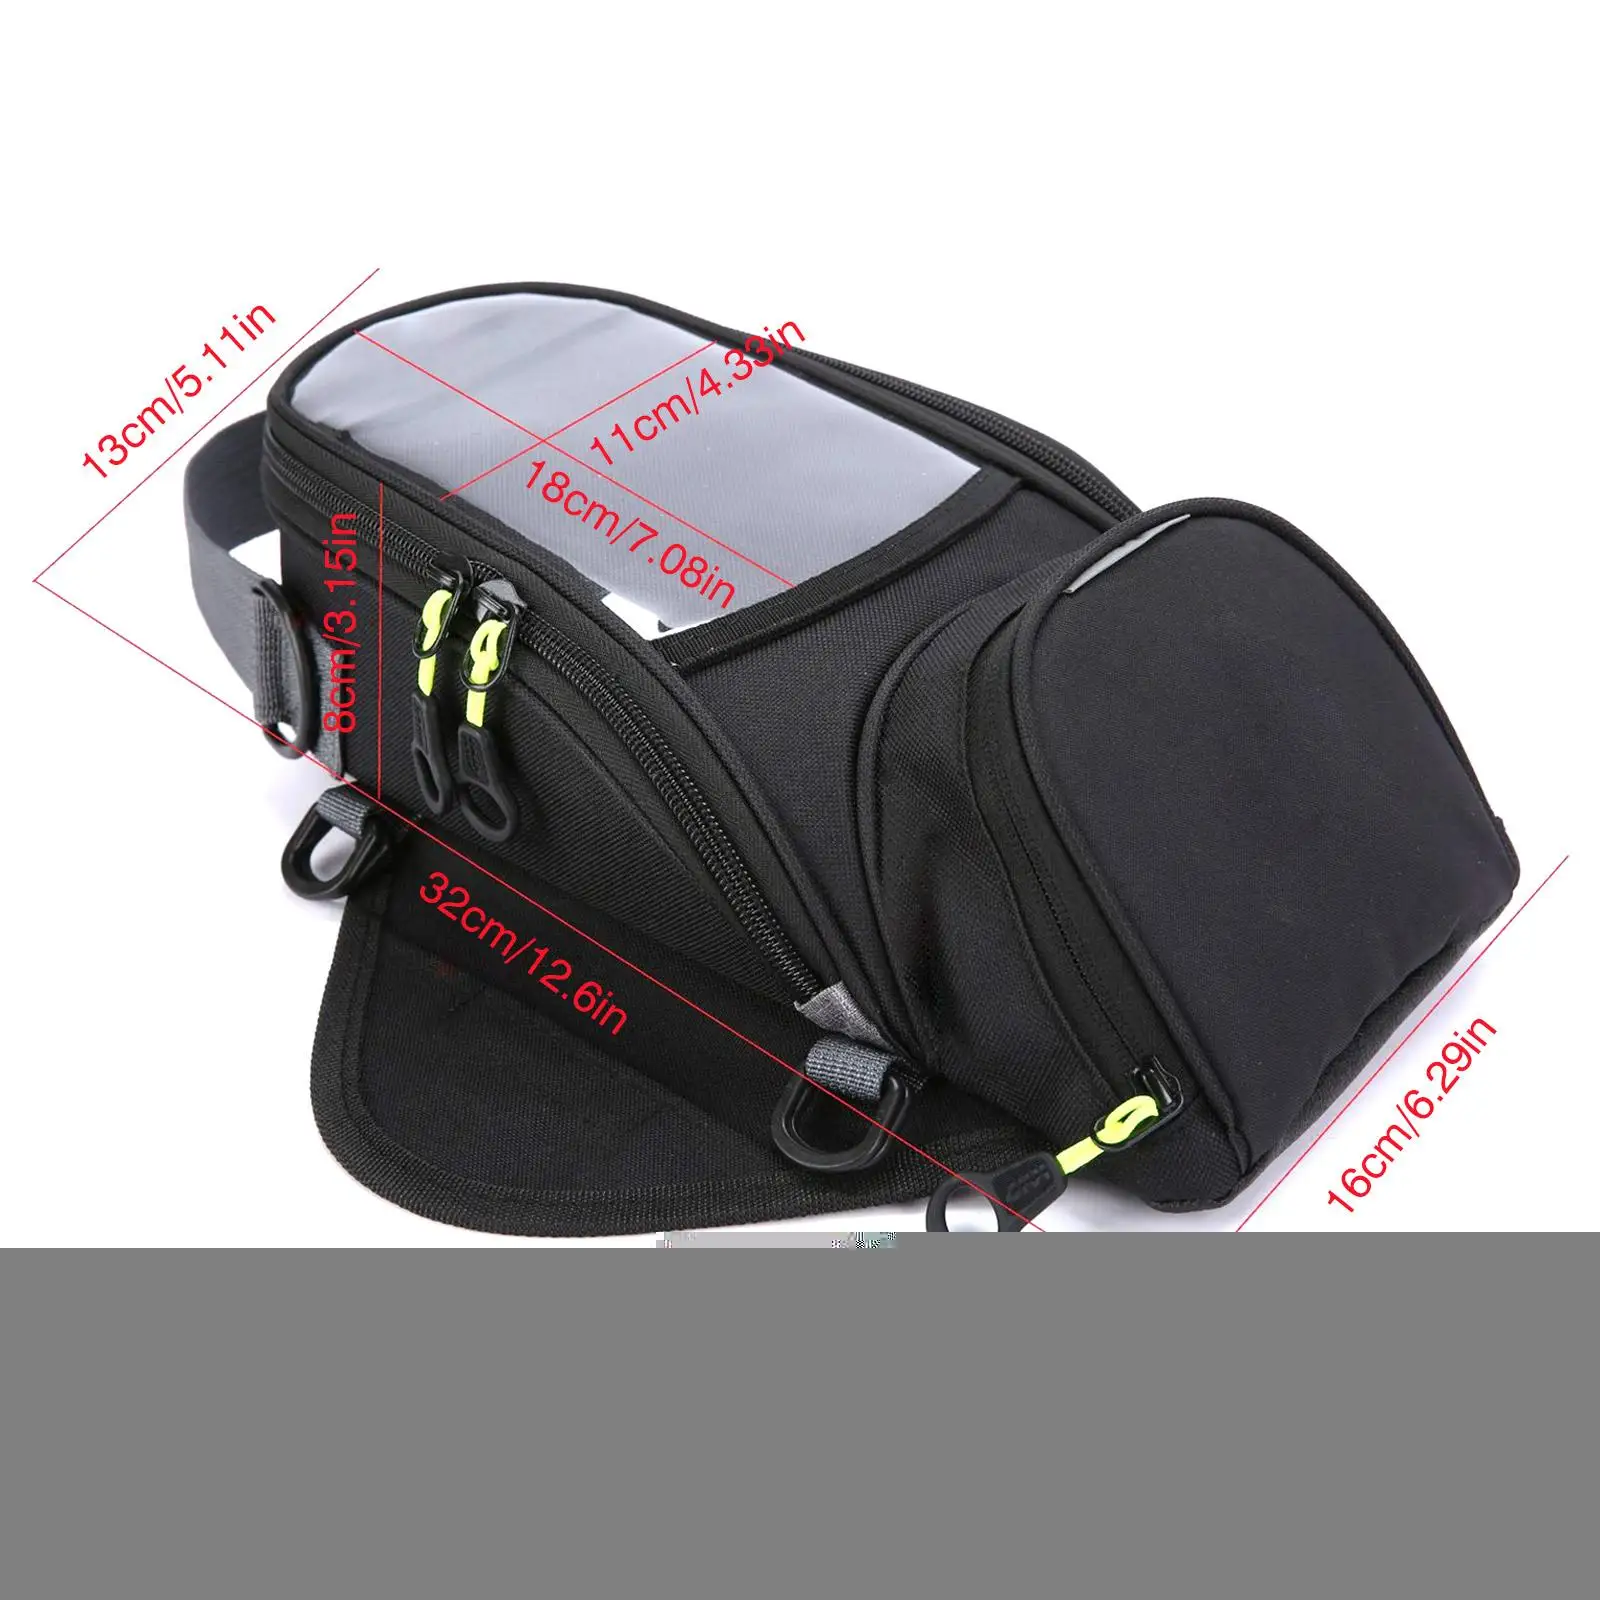 Motorcycle Fuel Bag Small Tank Bag with Rain Cover Forshort Trip Riding Bag Mobile Phone Navigation Cash Pockets side luggage enlarge